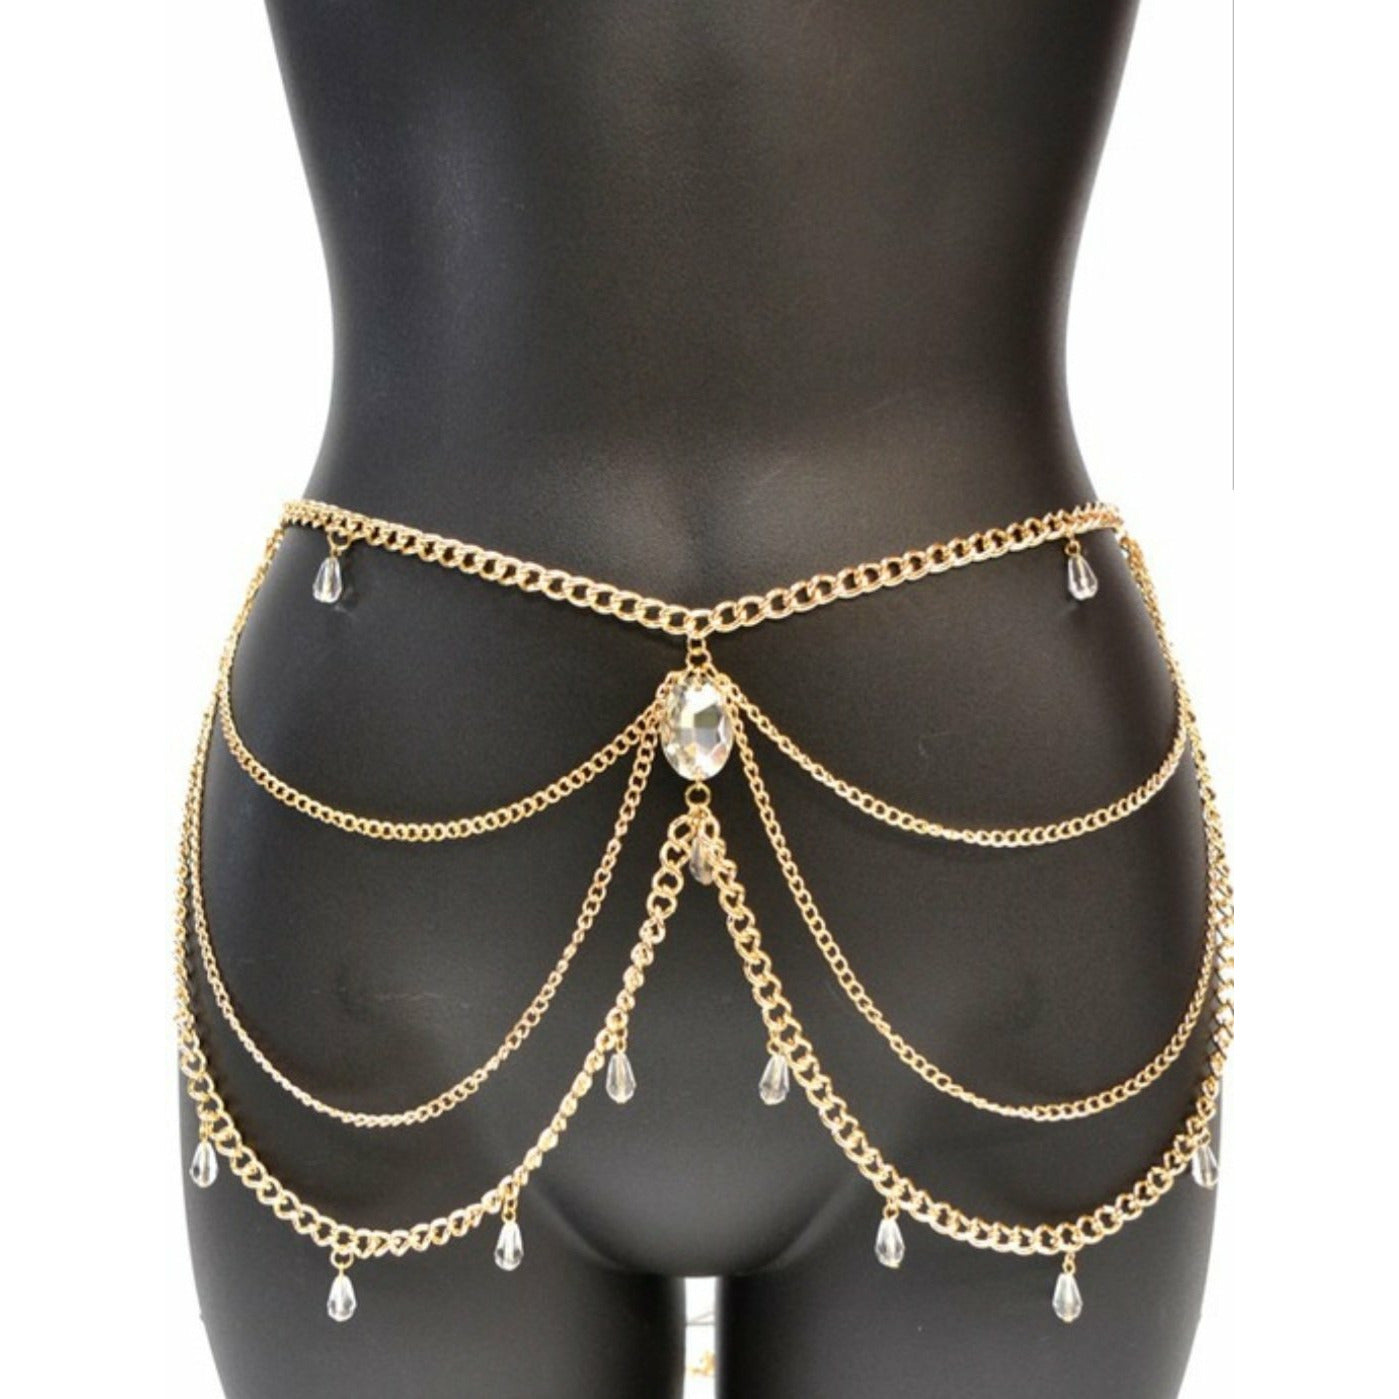 Give It To Em' Body Chain Belt